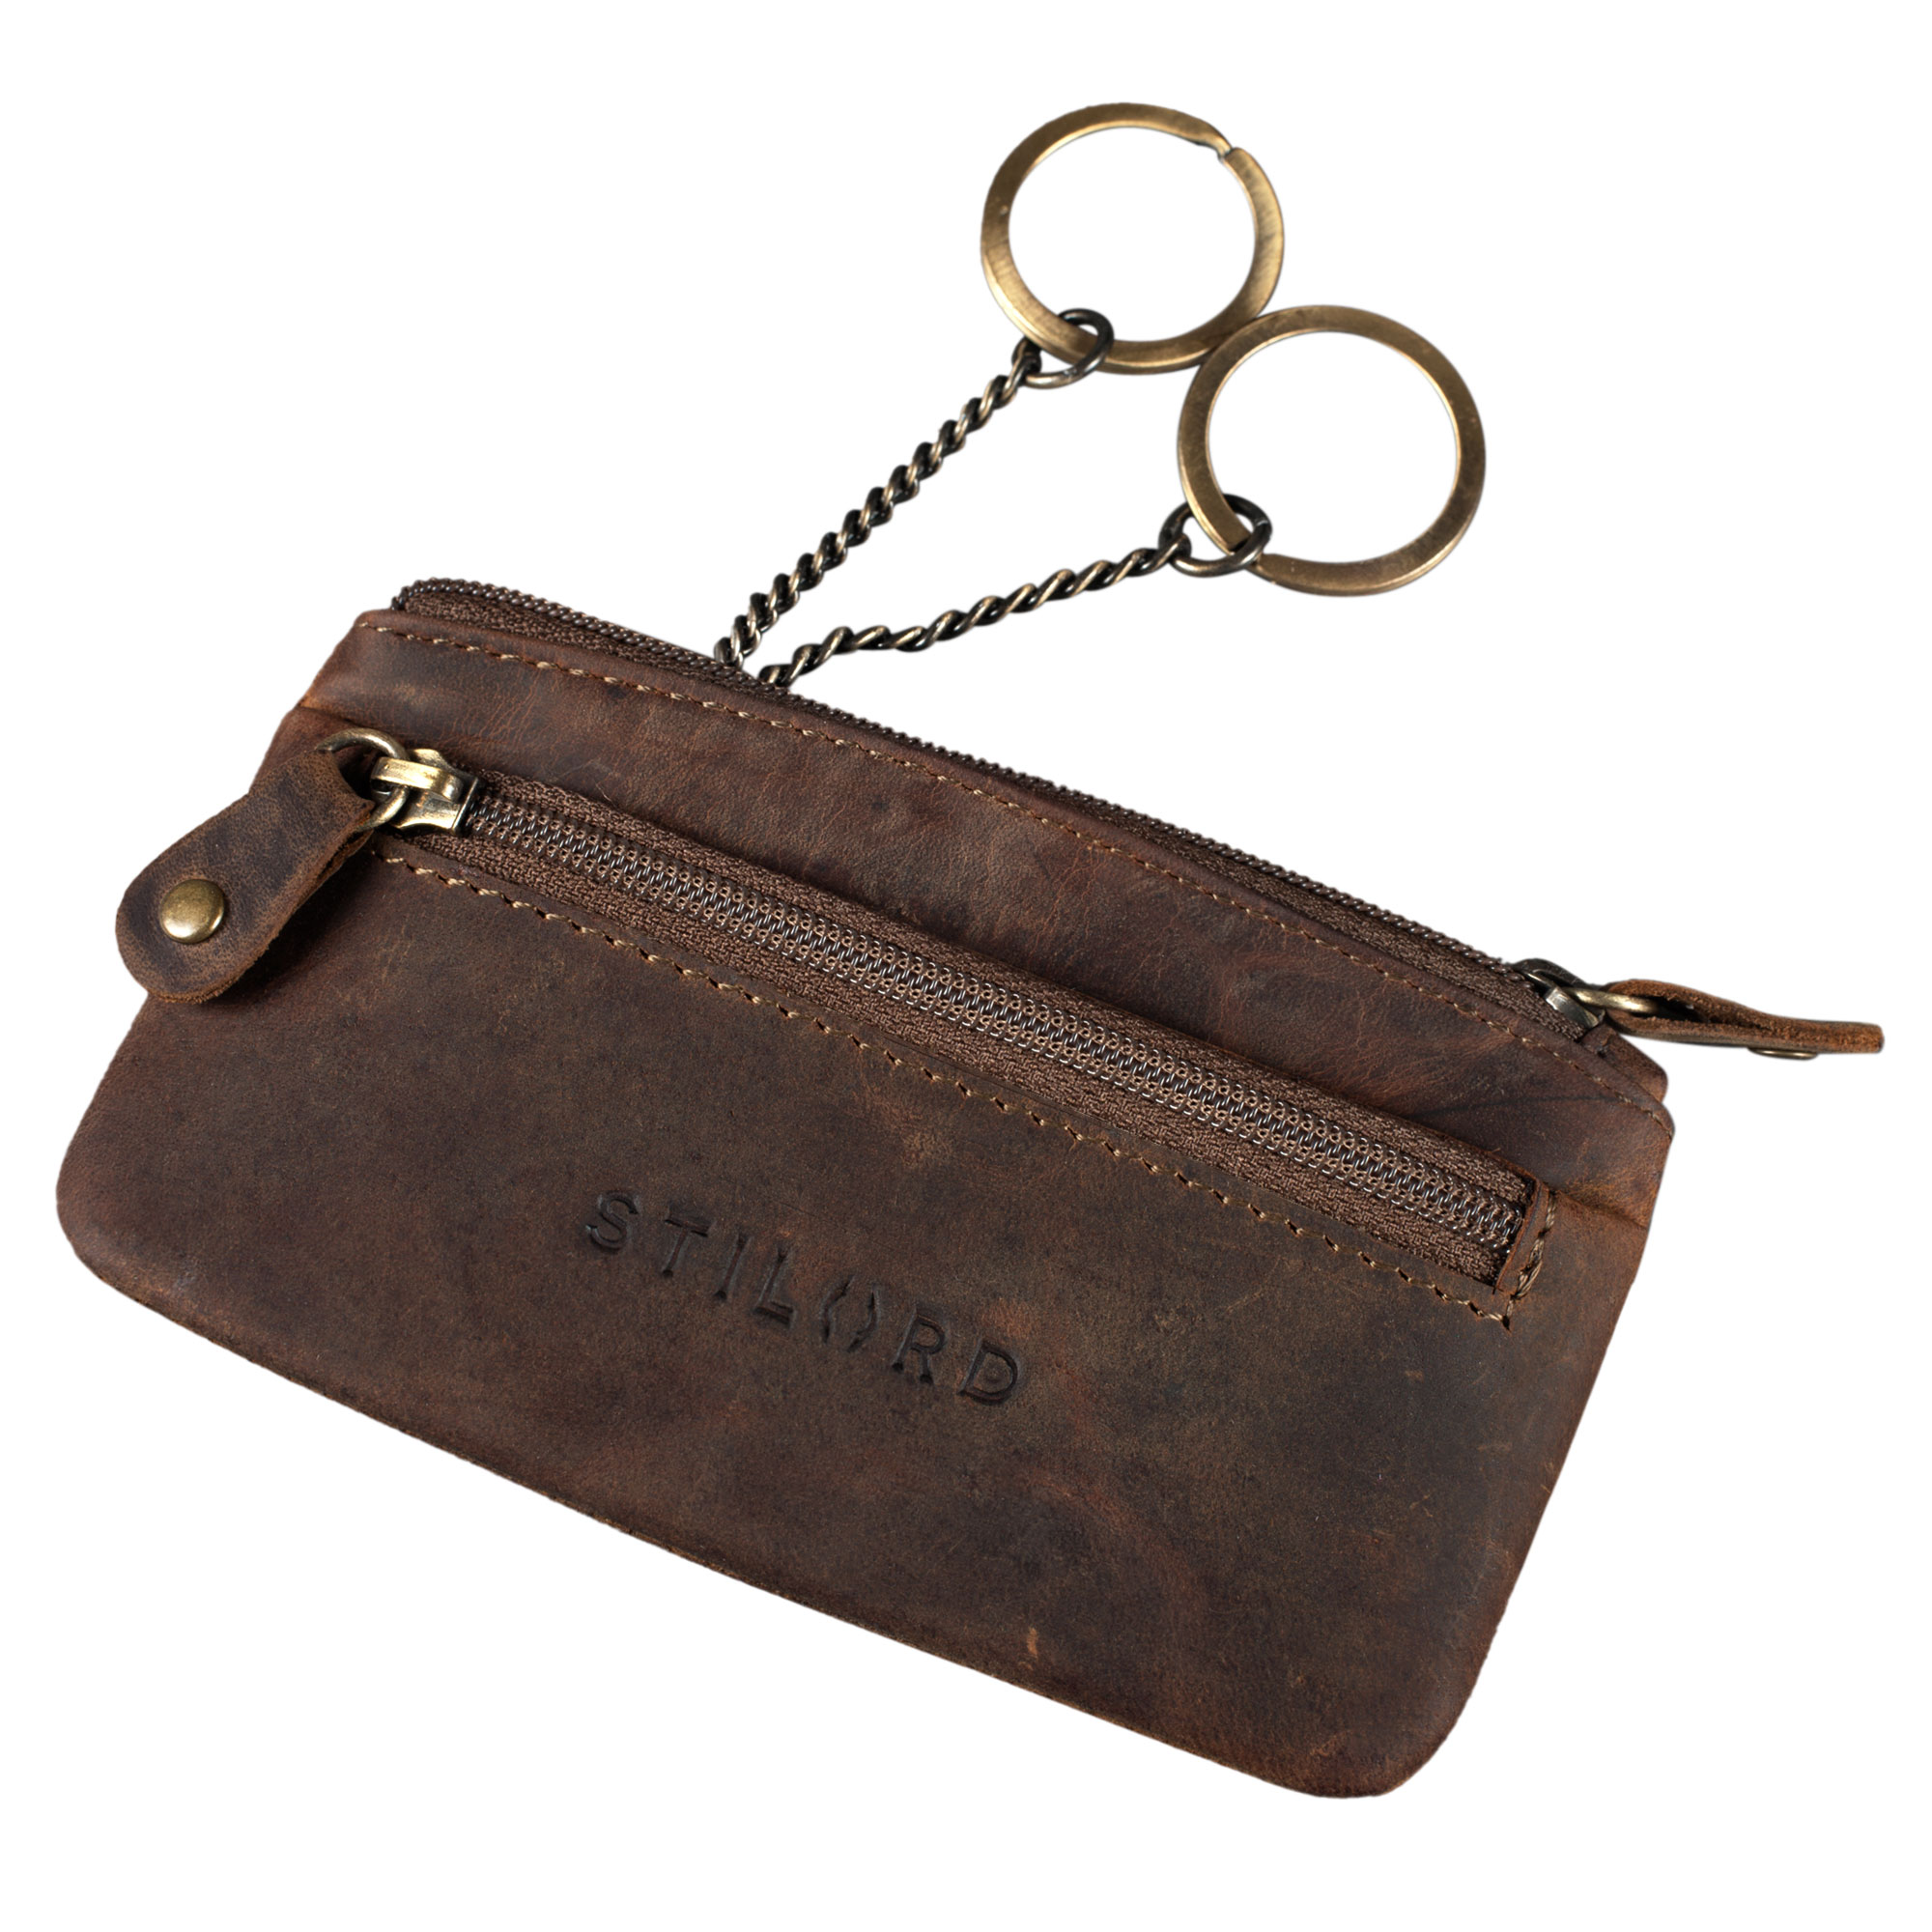 Spillbox Genuine Leather Coin Pouch /Key ring / Leather Keychain / Key  Holder for Home, car, bike with